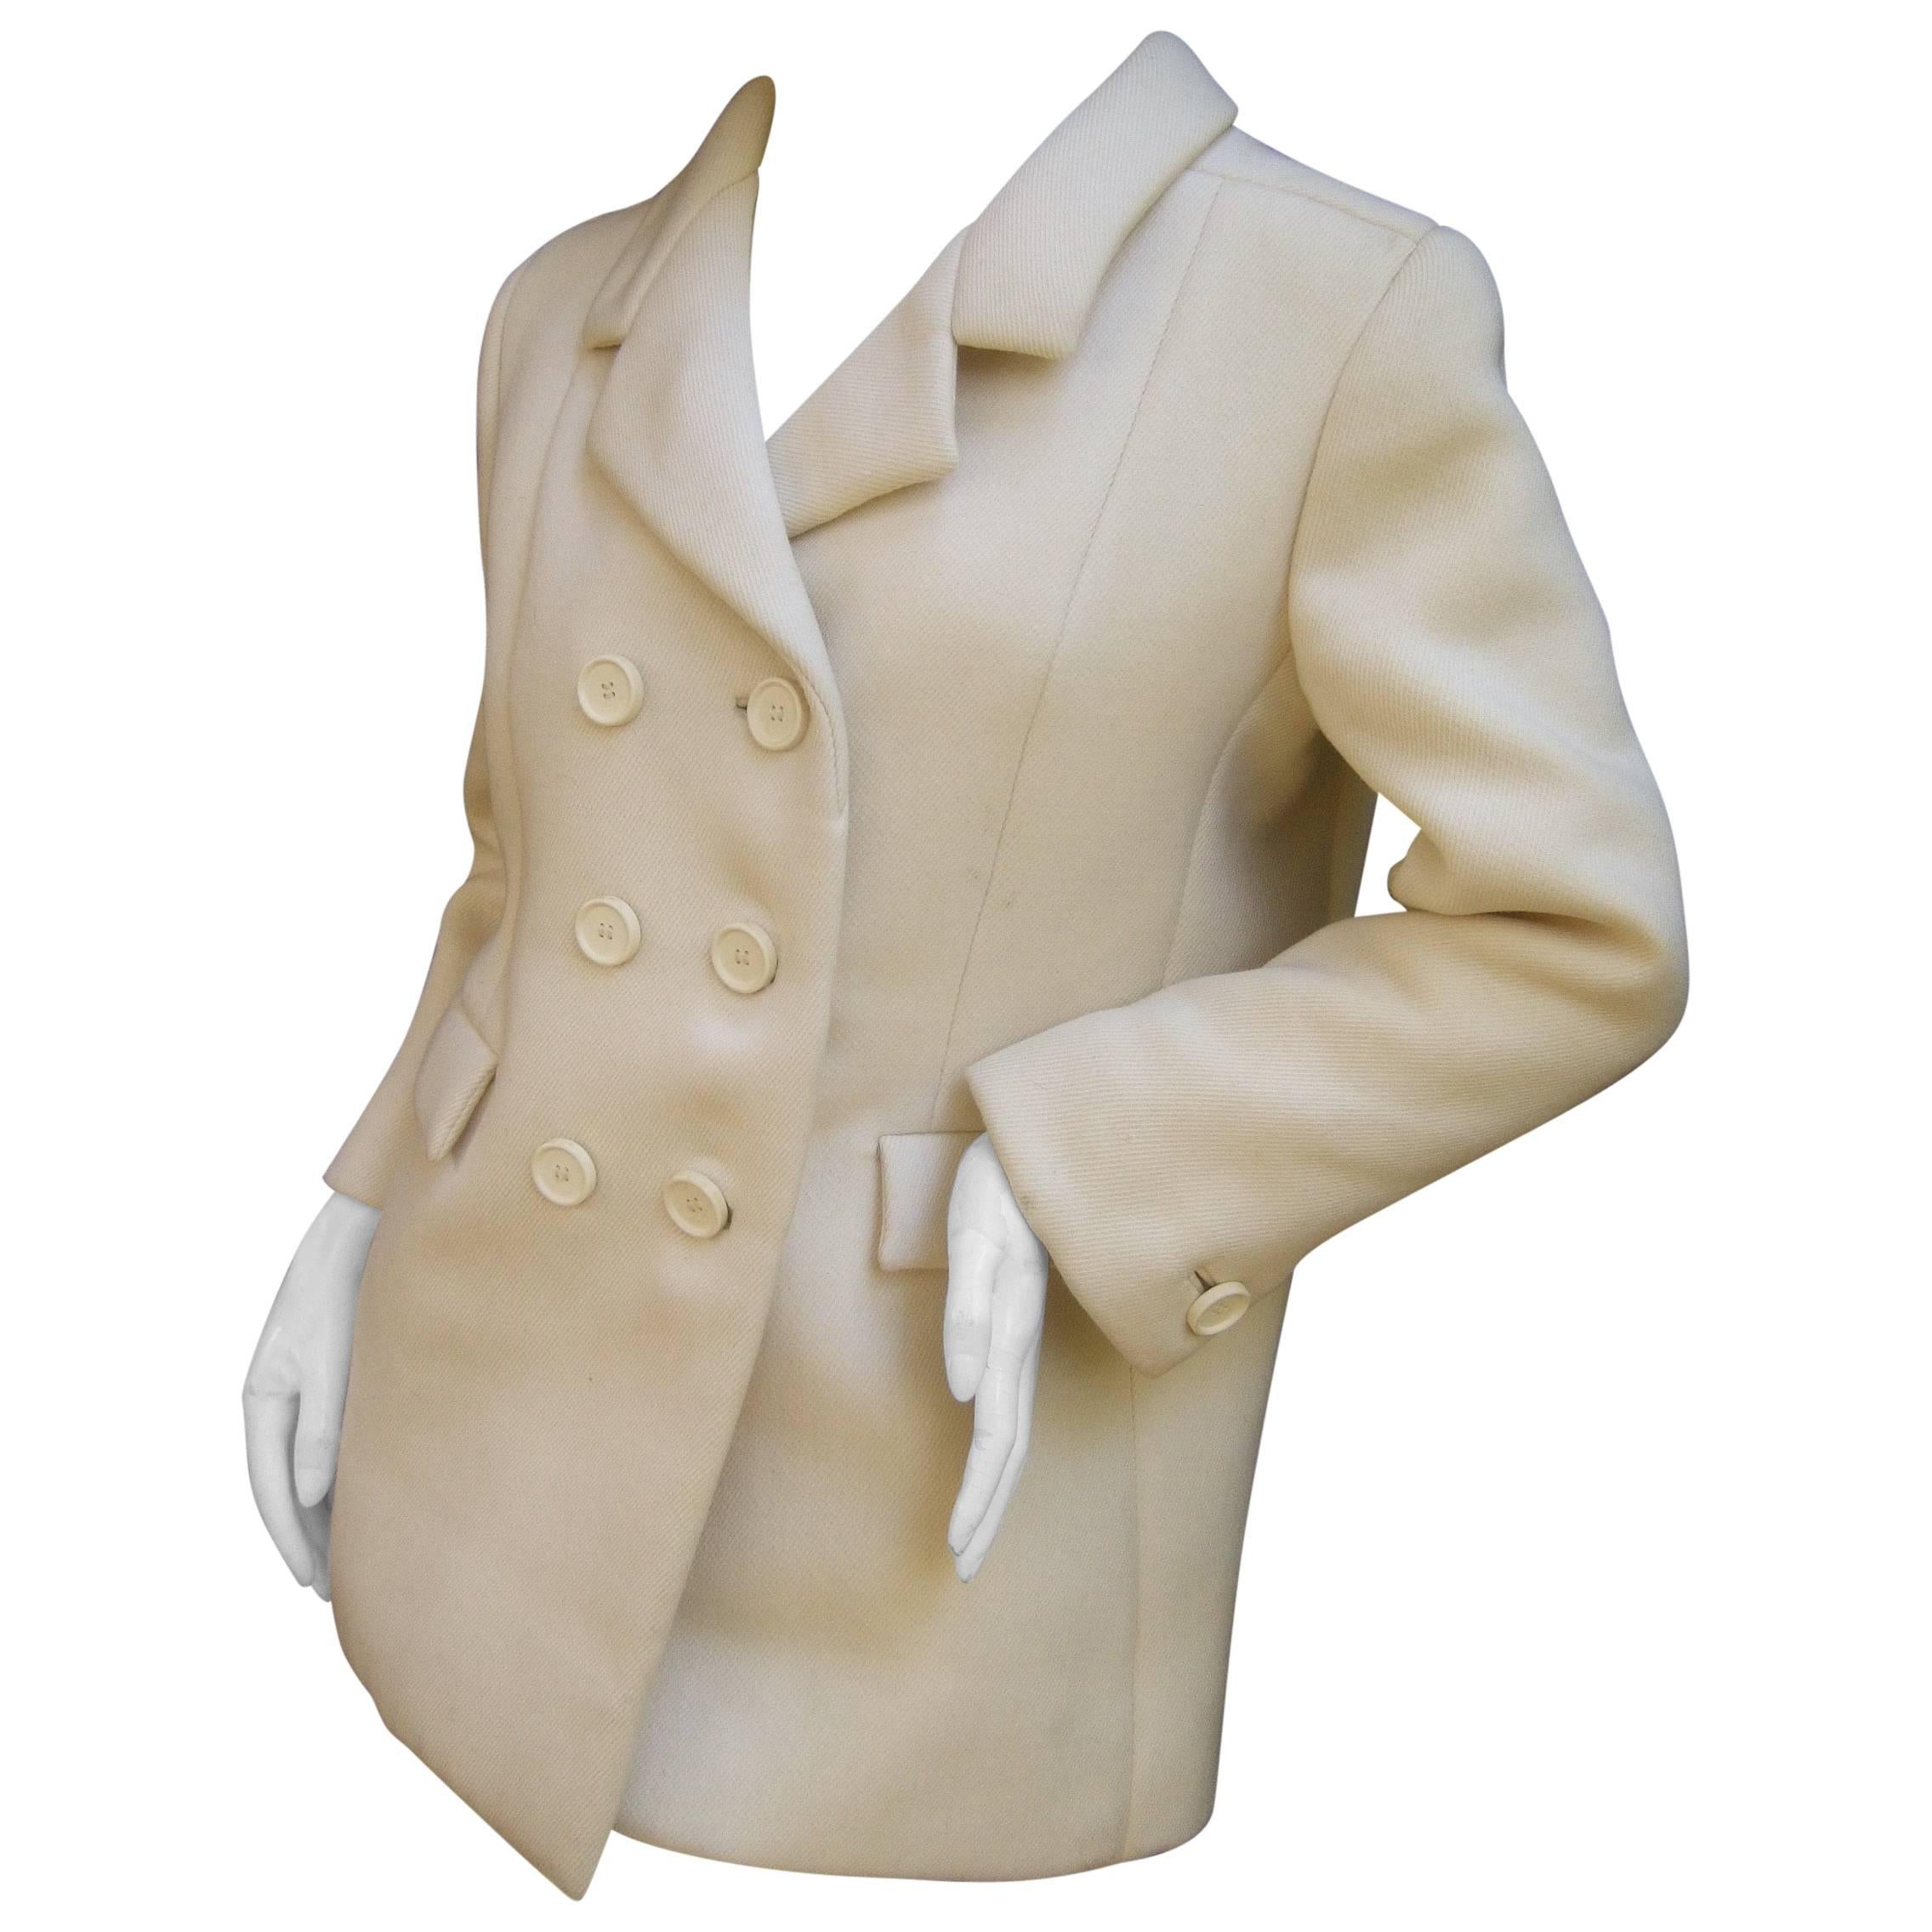 Norman Norell Couture Cream Wool Jacket circa 1970